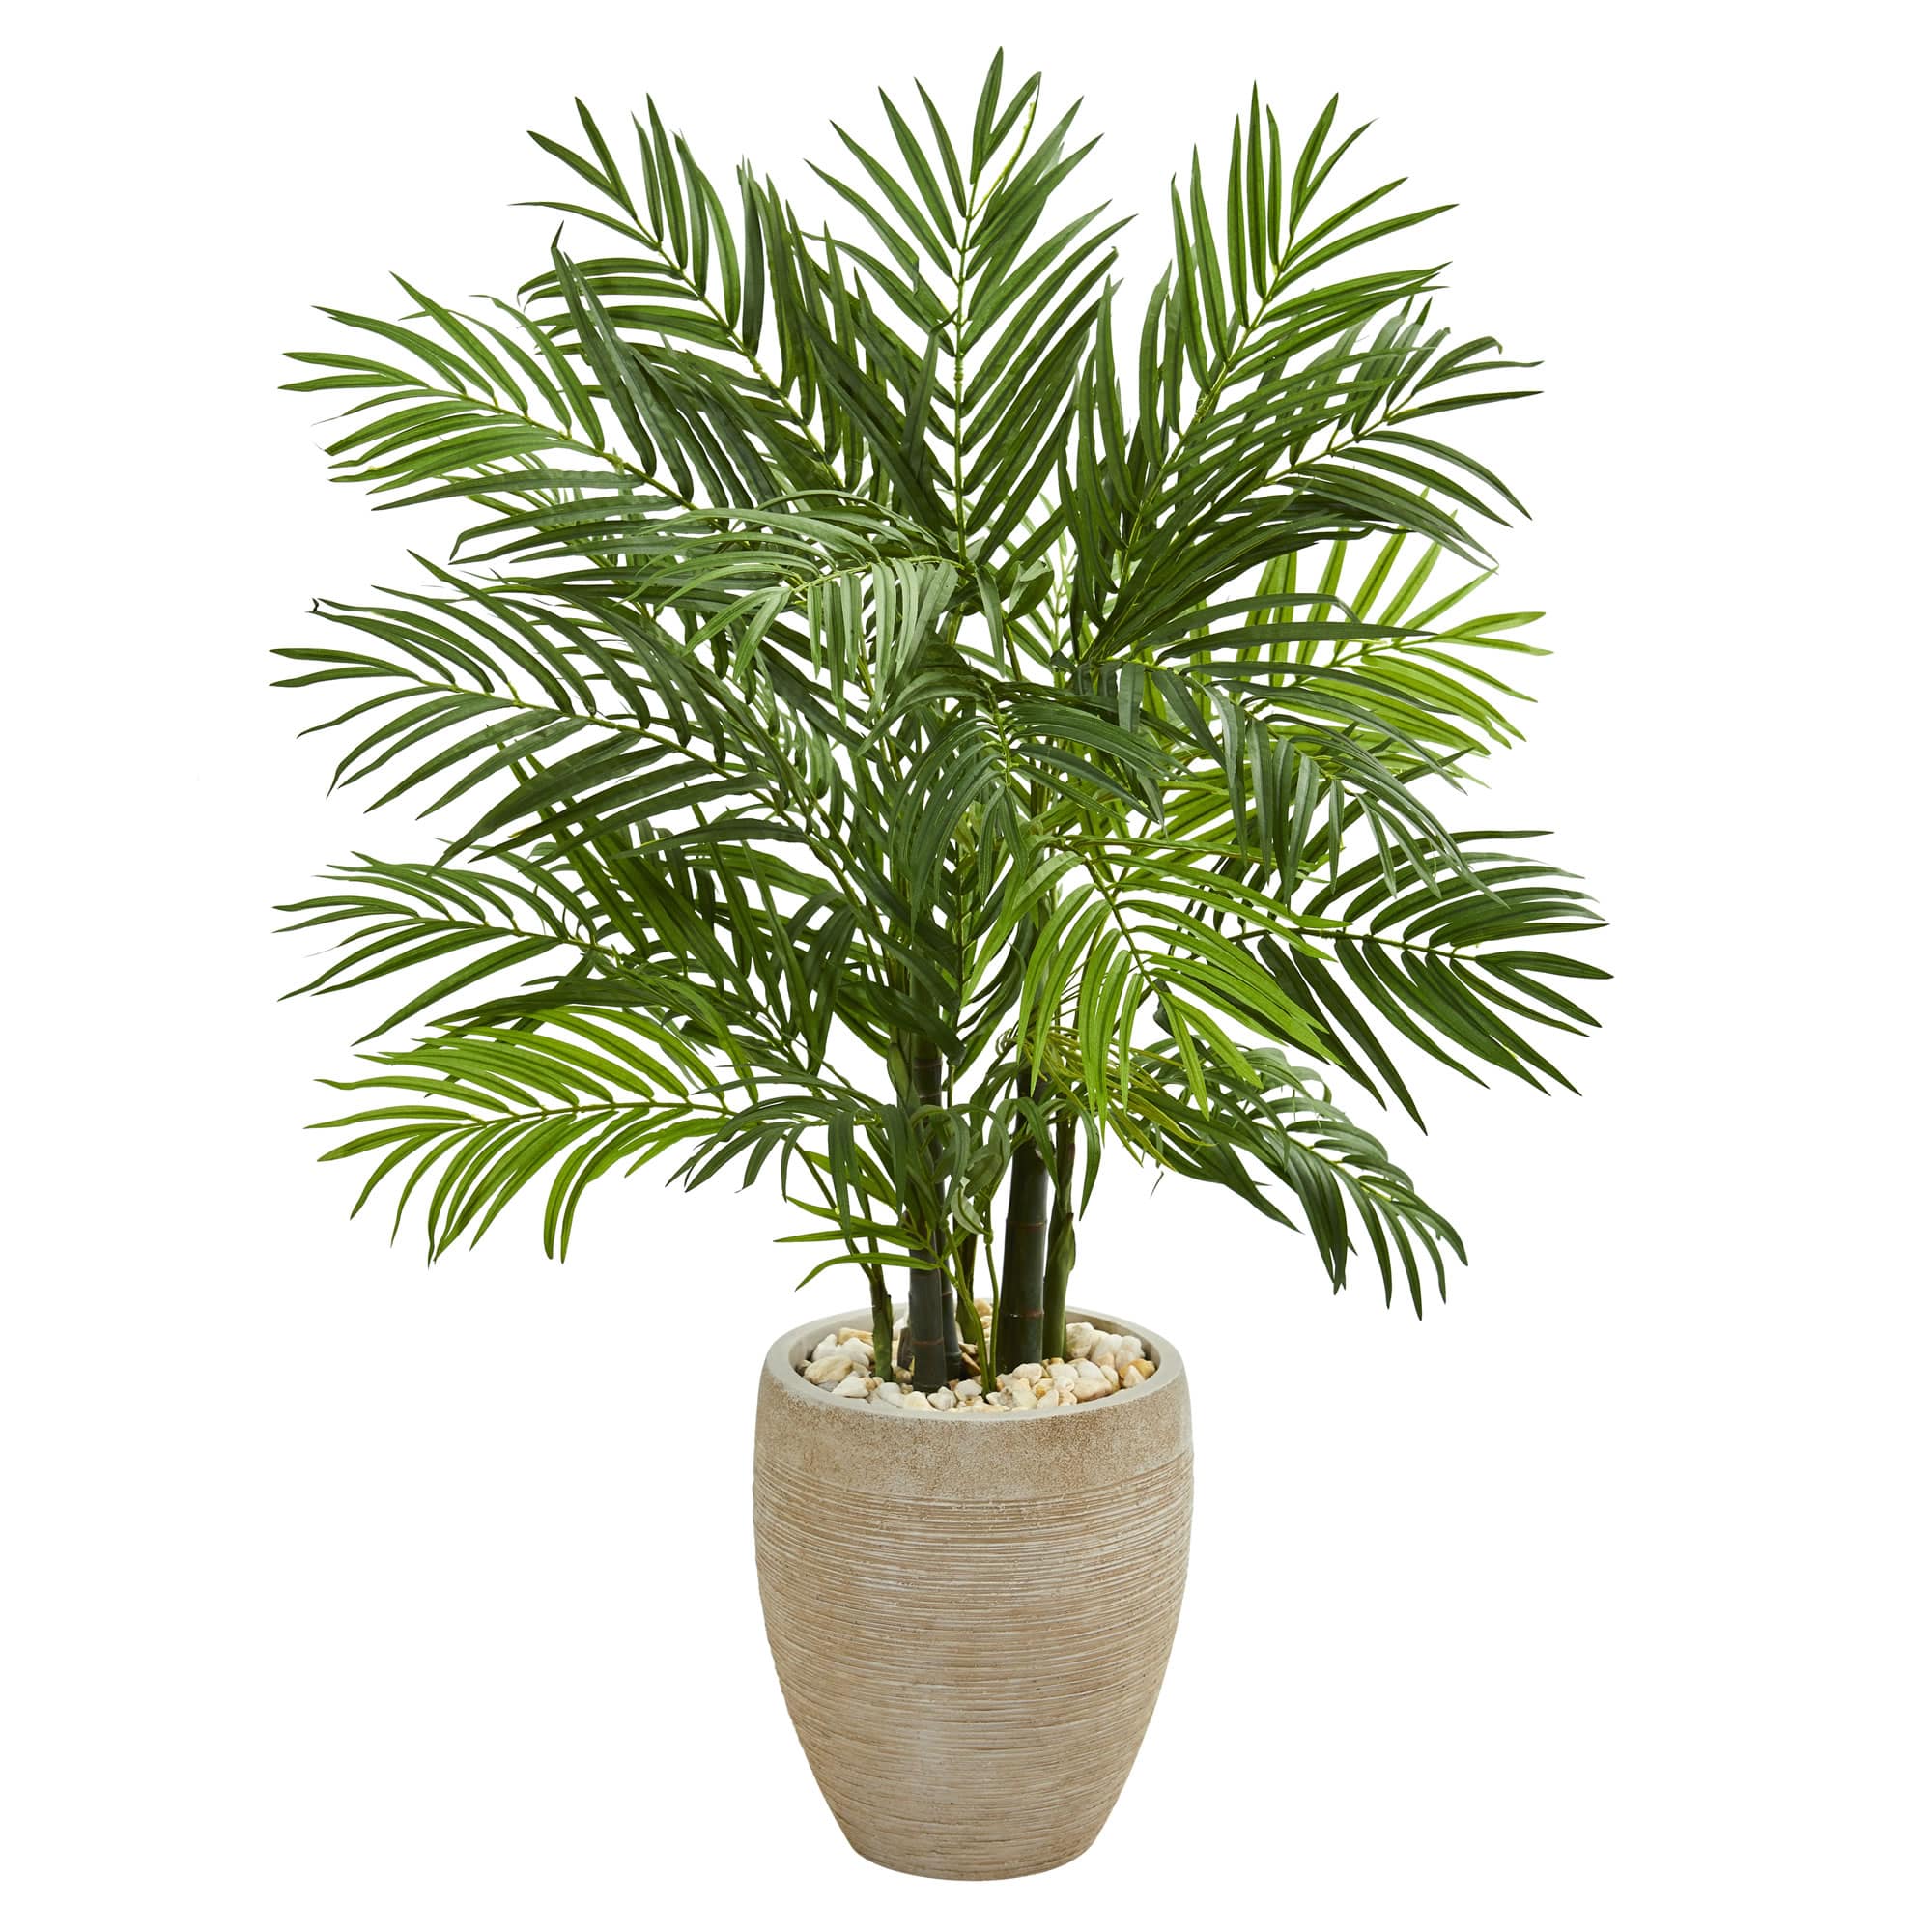 4ft. Areca Palm Artificial Tree in Sand Colored Planter